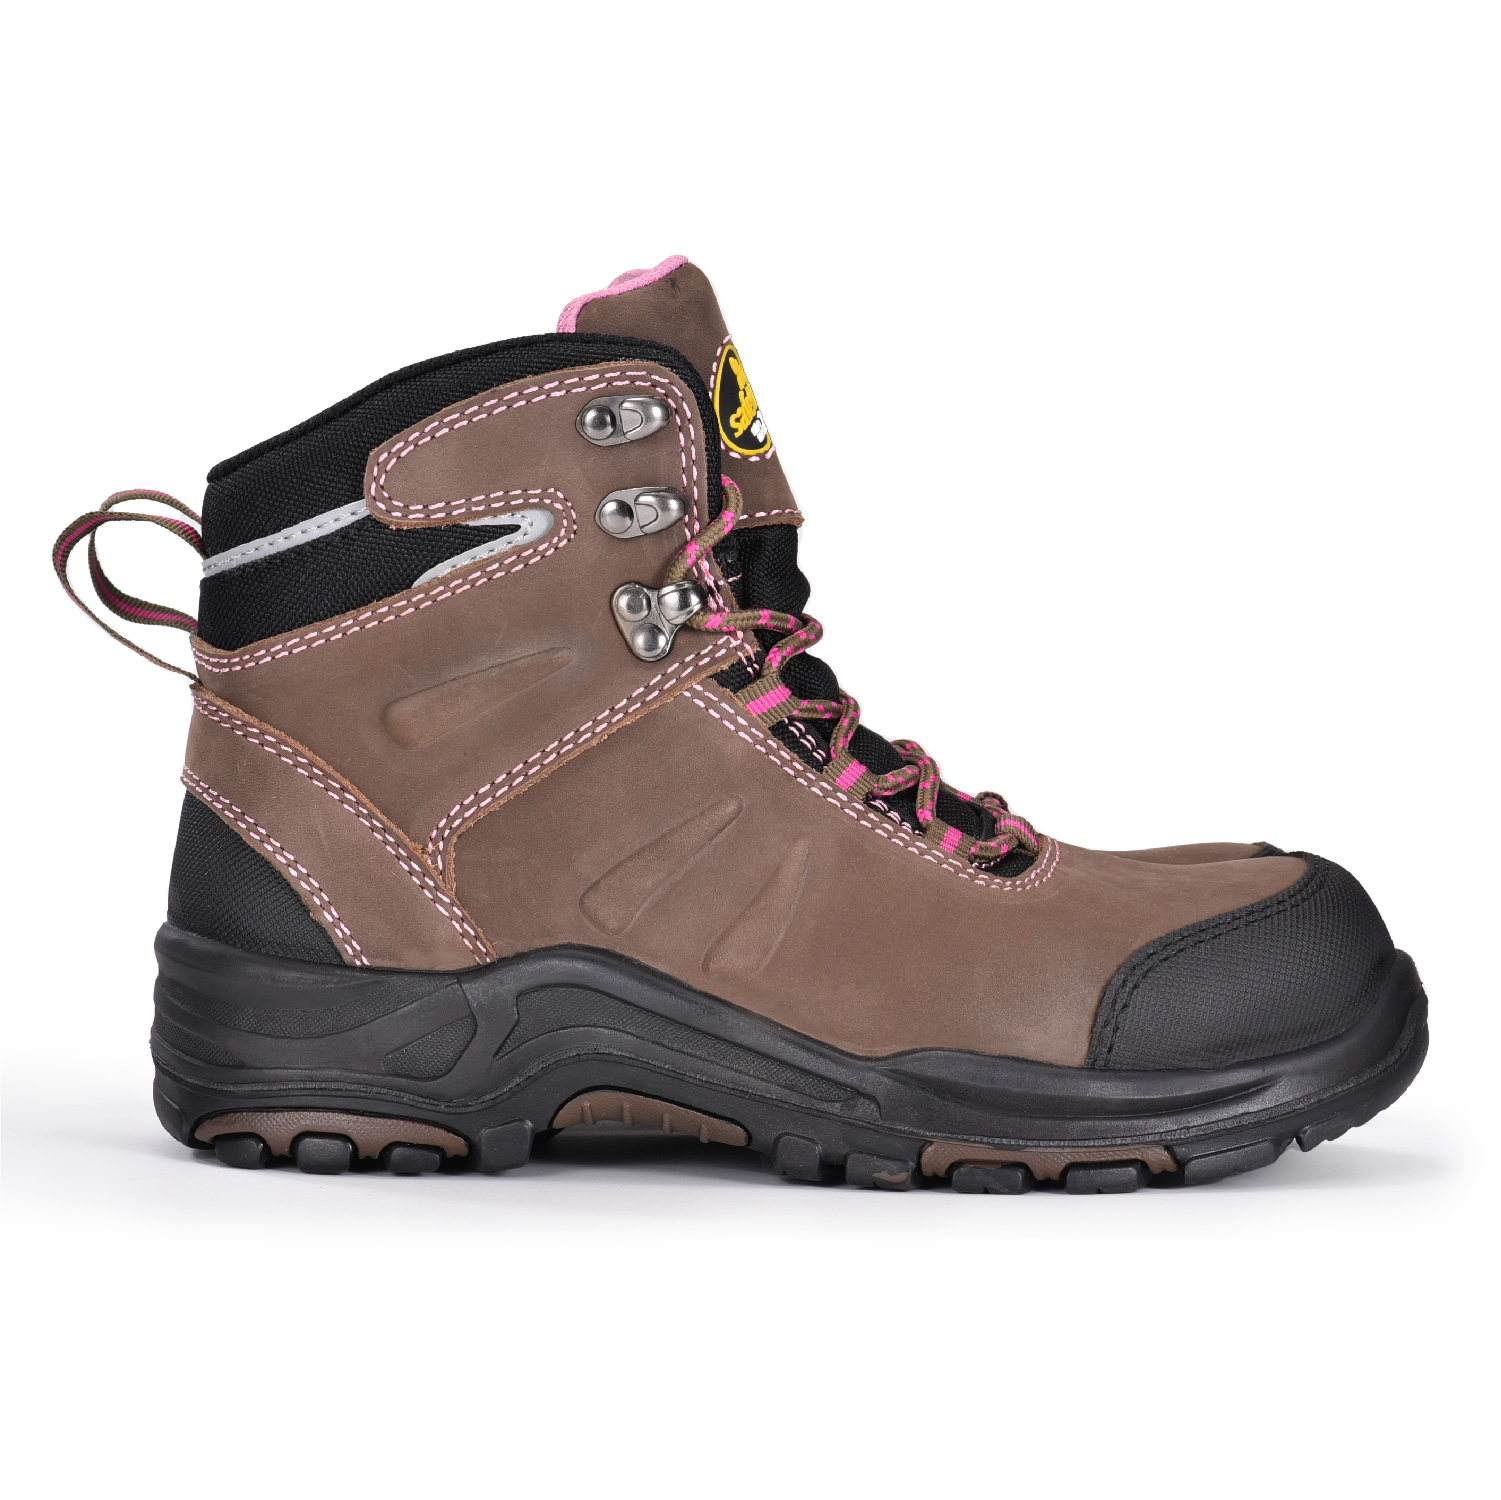 Waterproof & Slip Resistant Womens Work Boots with Composite Toe M-8553